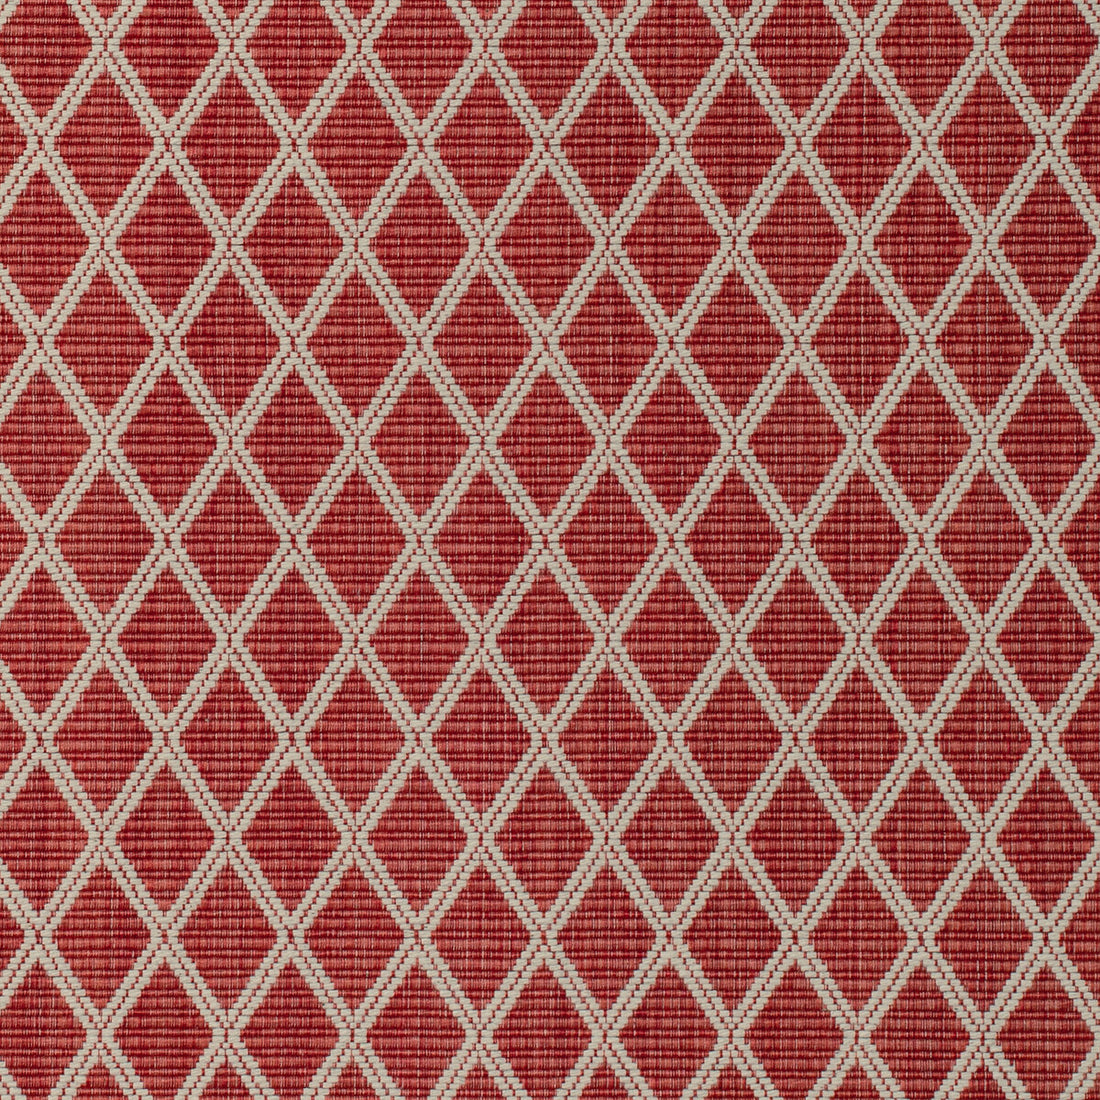 Cancale Woven fabric in red color - pattern 8020109.19.0 - by Brunschwig &amp; Fils in the Granville Weaves collection